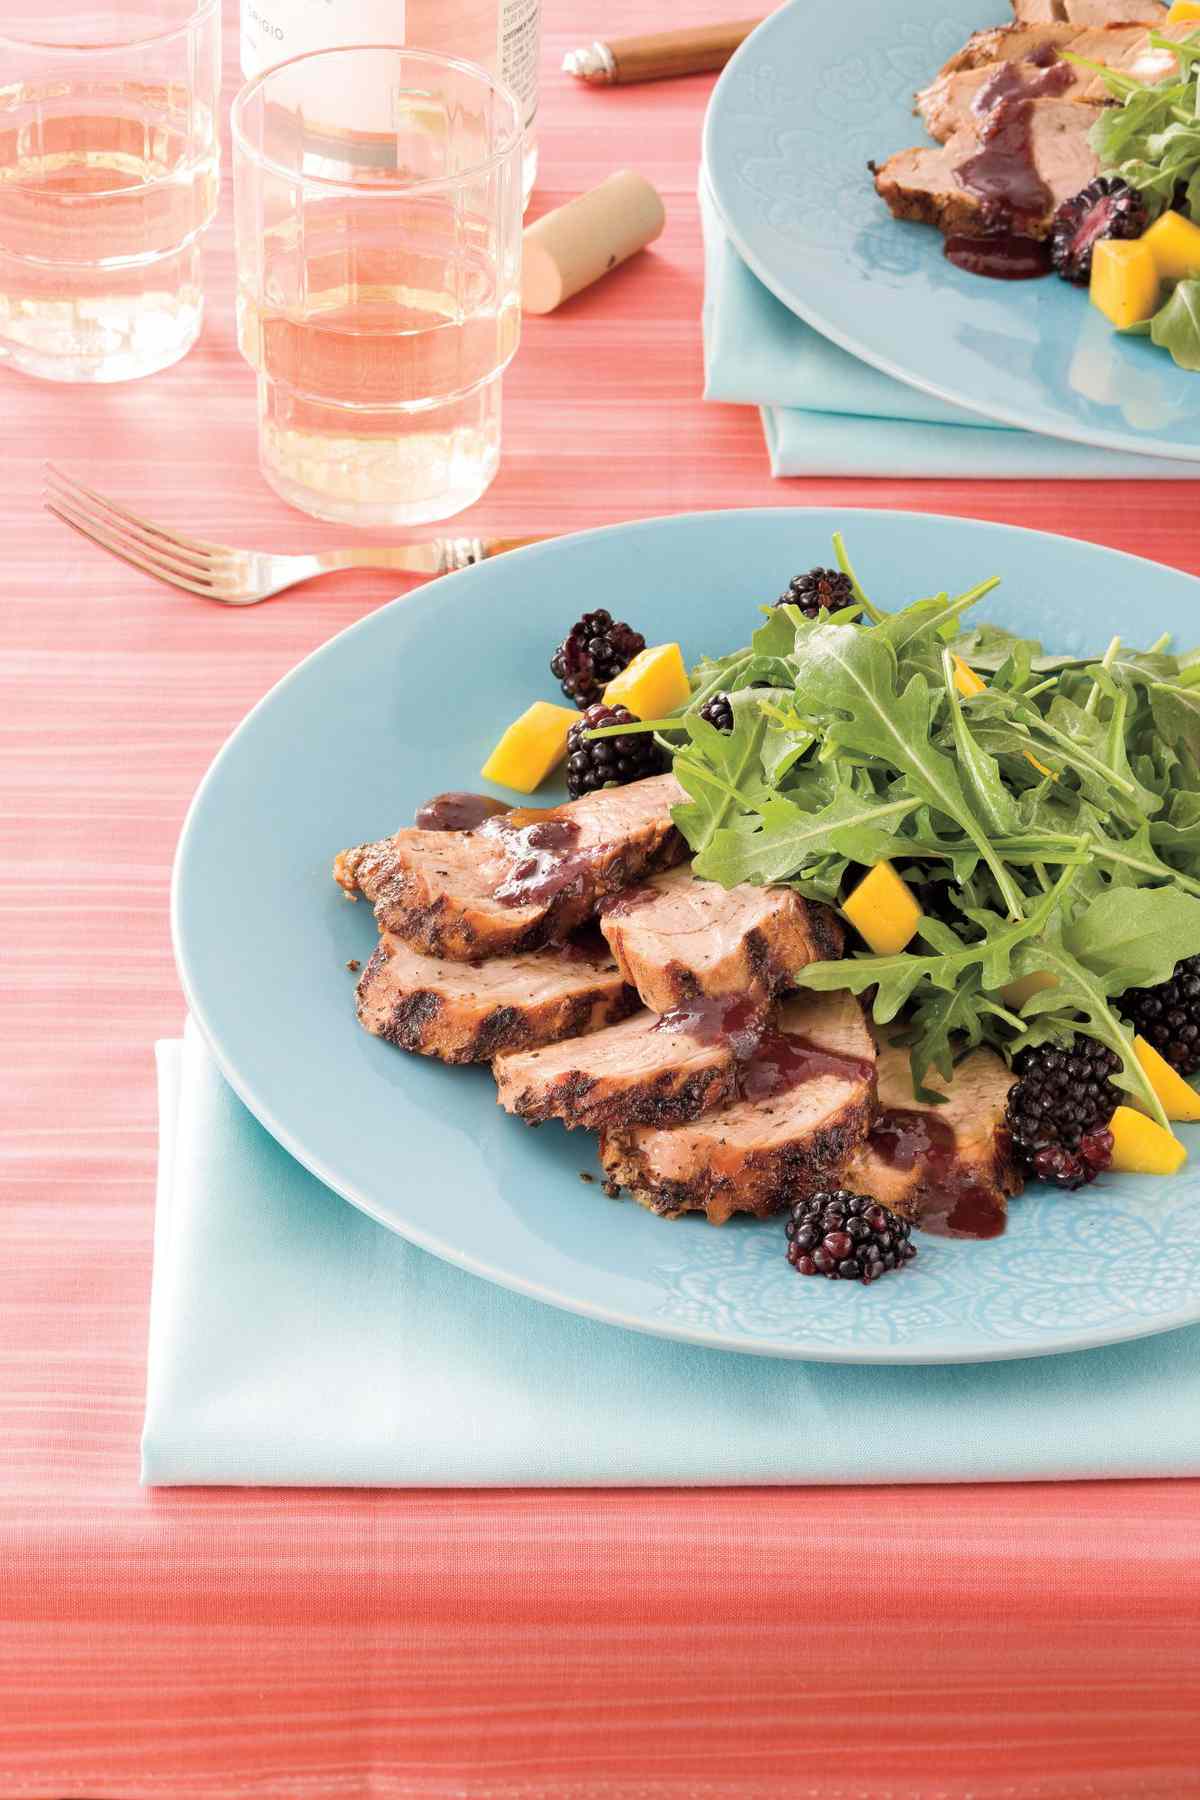 Recipes: Spicy Grilled Pork Tenderloin With Blackberry Sauce